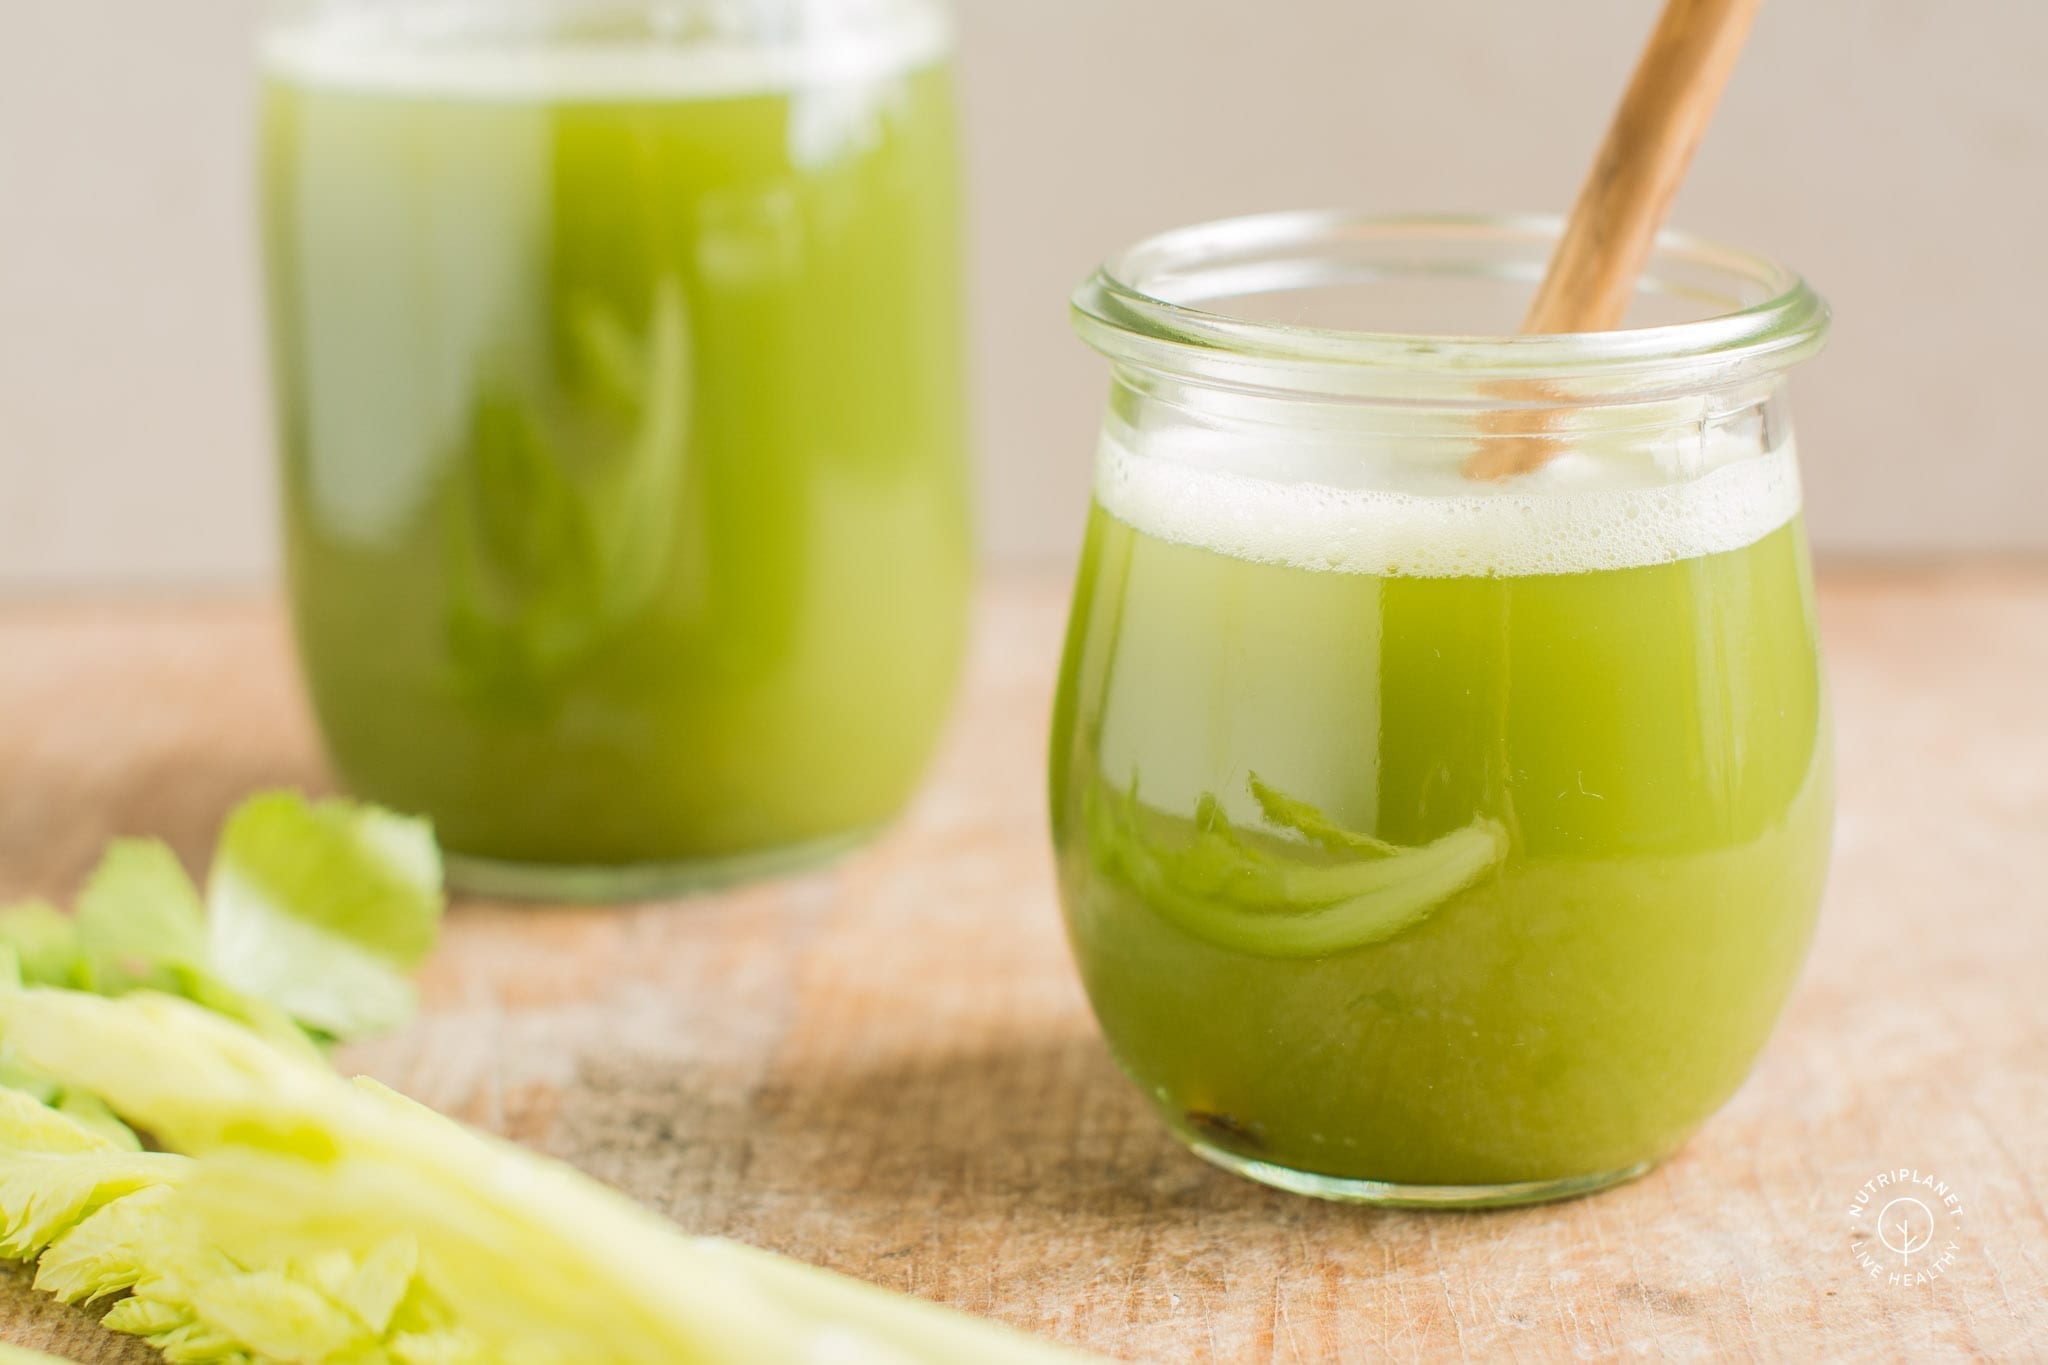 Celery juice benefits, my experience and the correct way to drink it